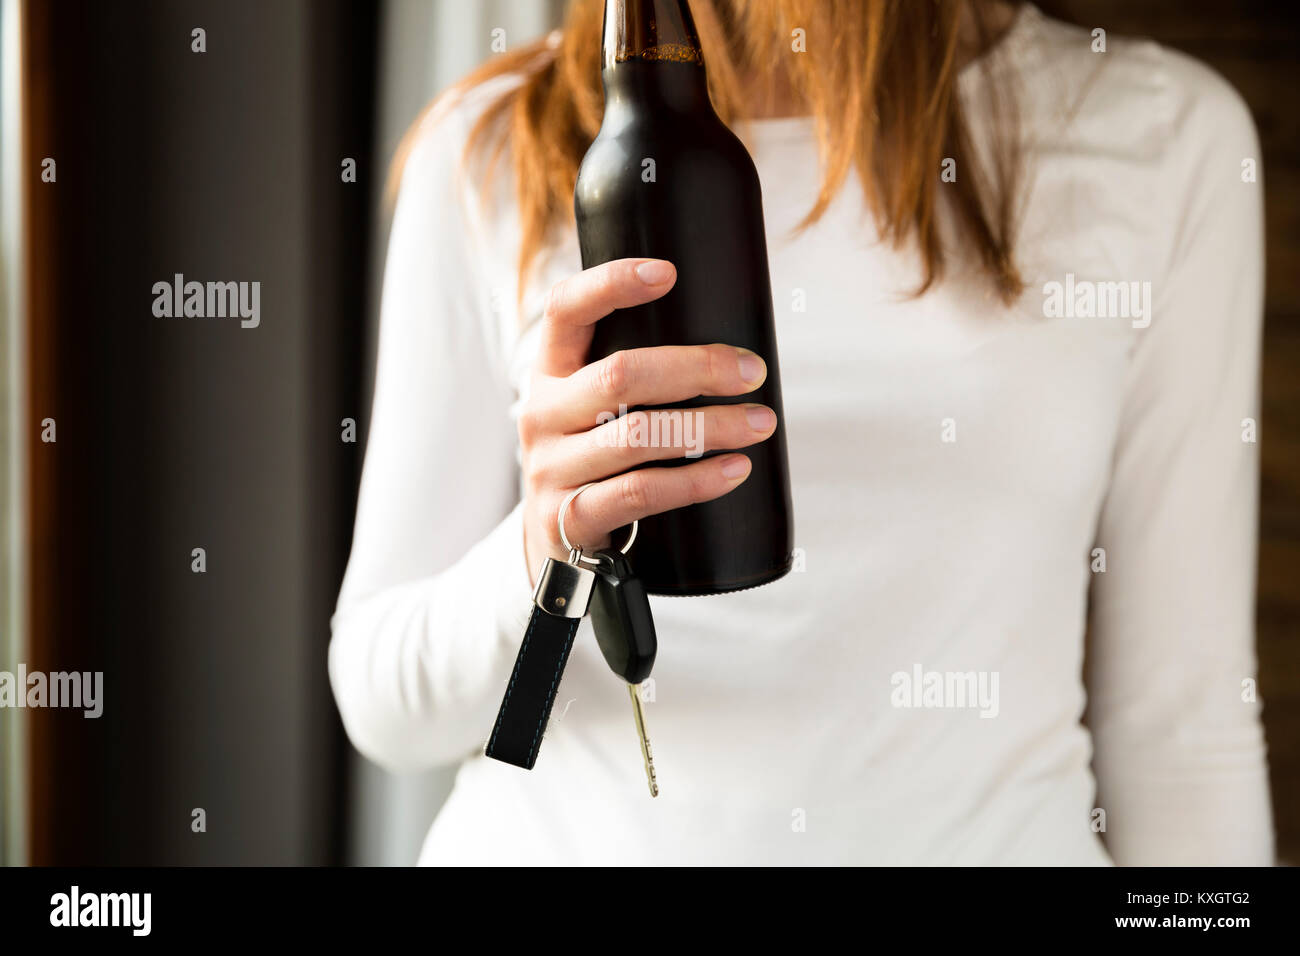 Do not drink and drive concept. Woman holding bottle of beer and car keys in hand Stock Photo